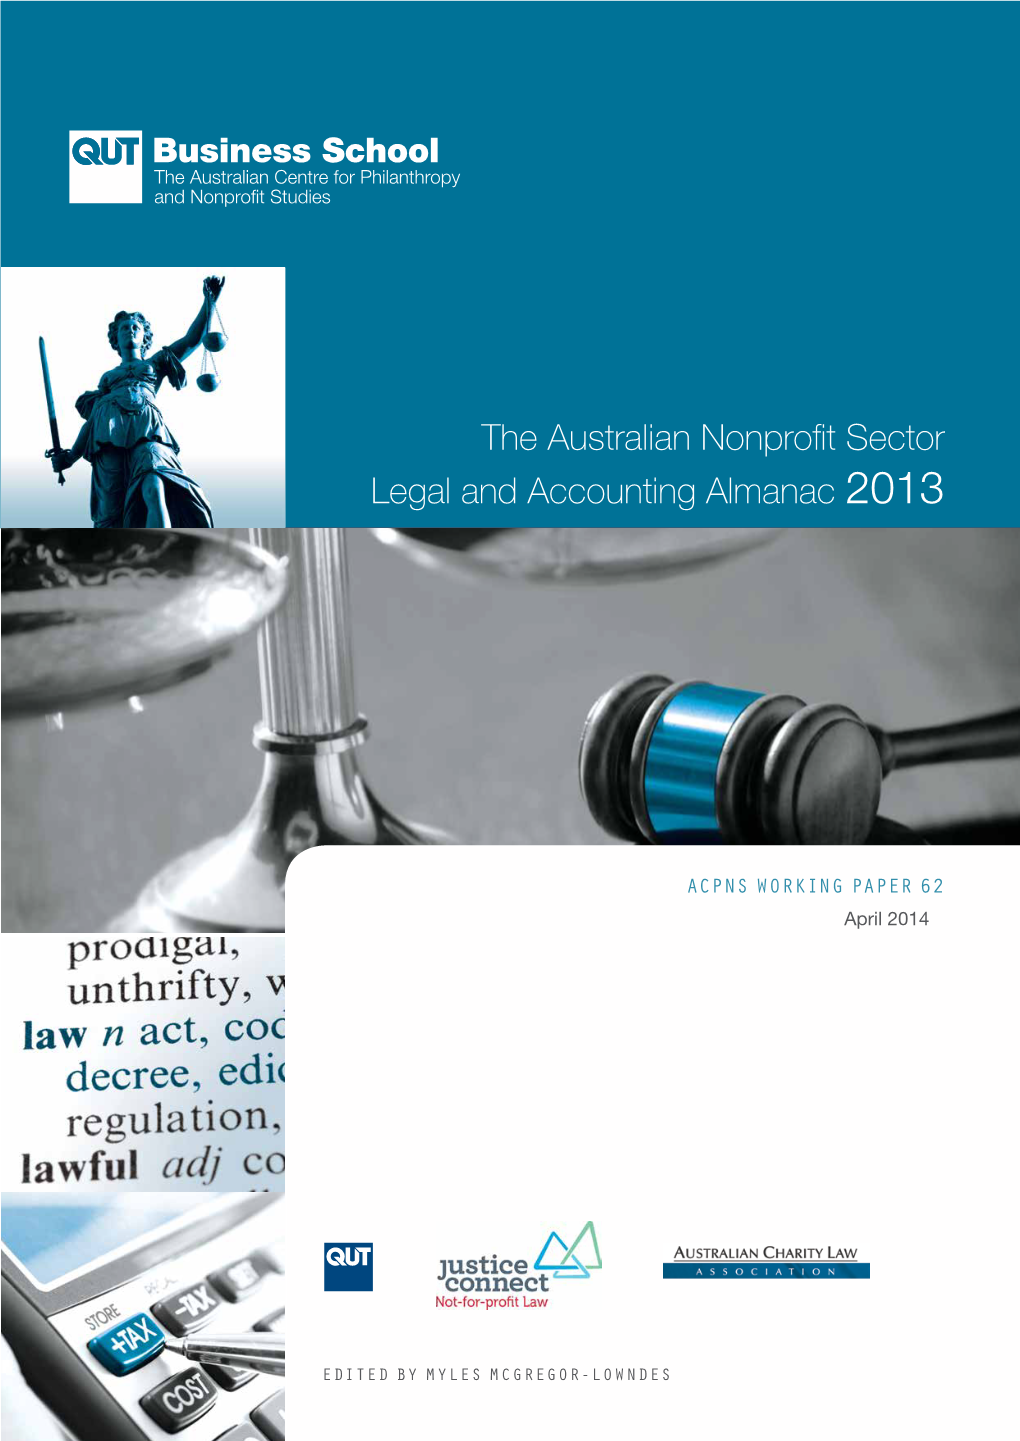 The Australian Nonprofit Sector Legal and Accounting Almanac 2013